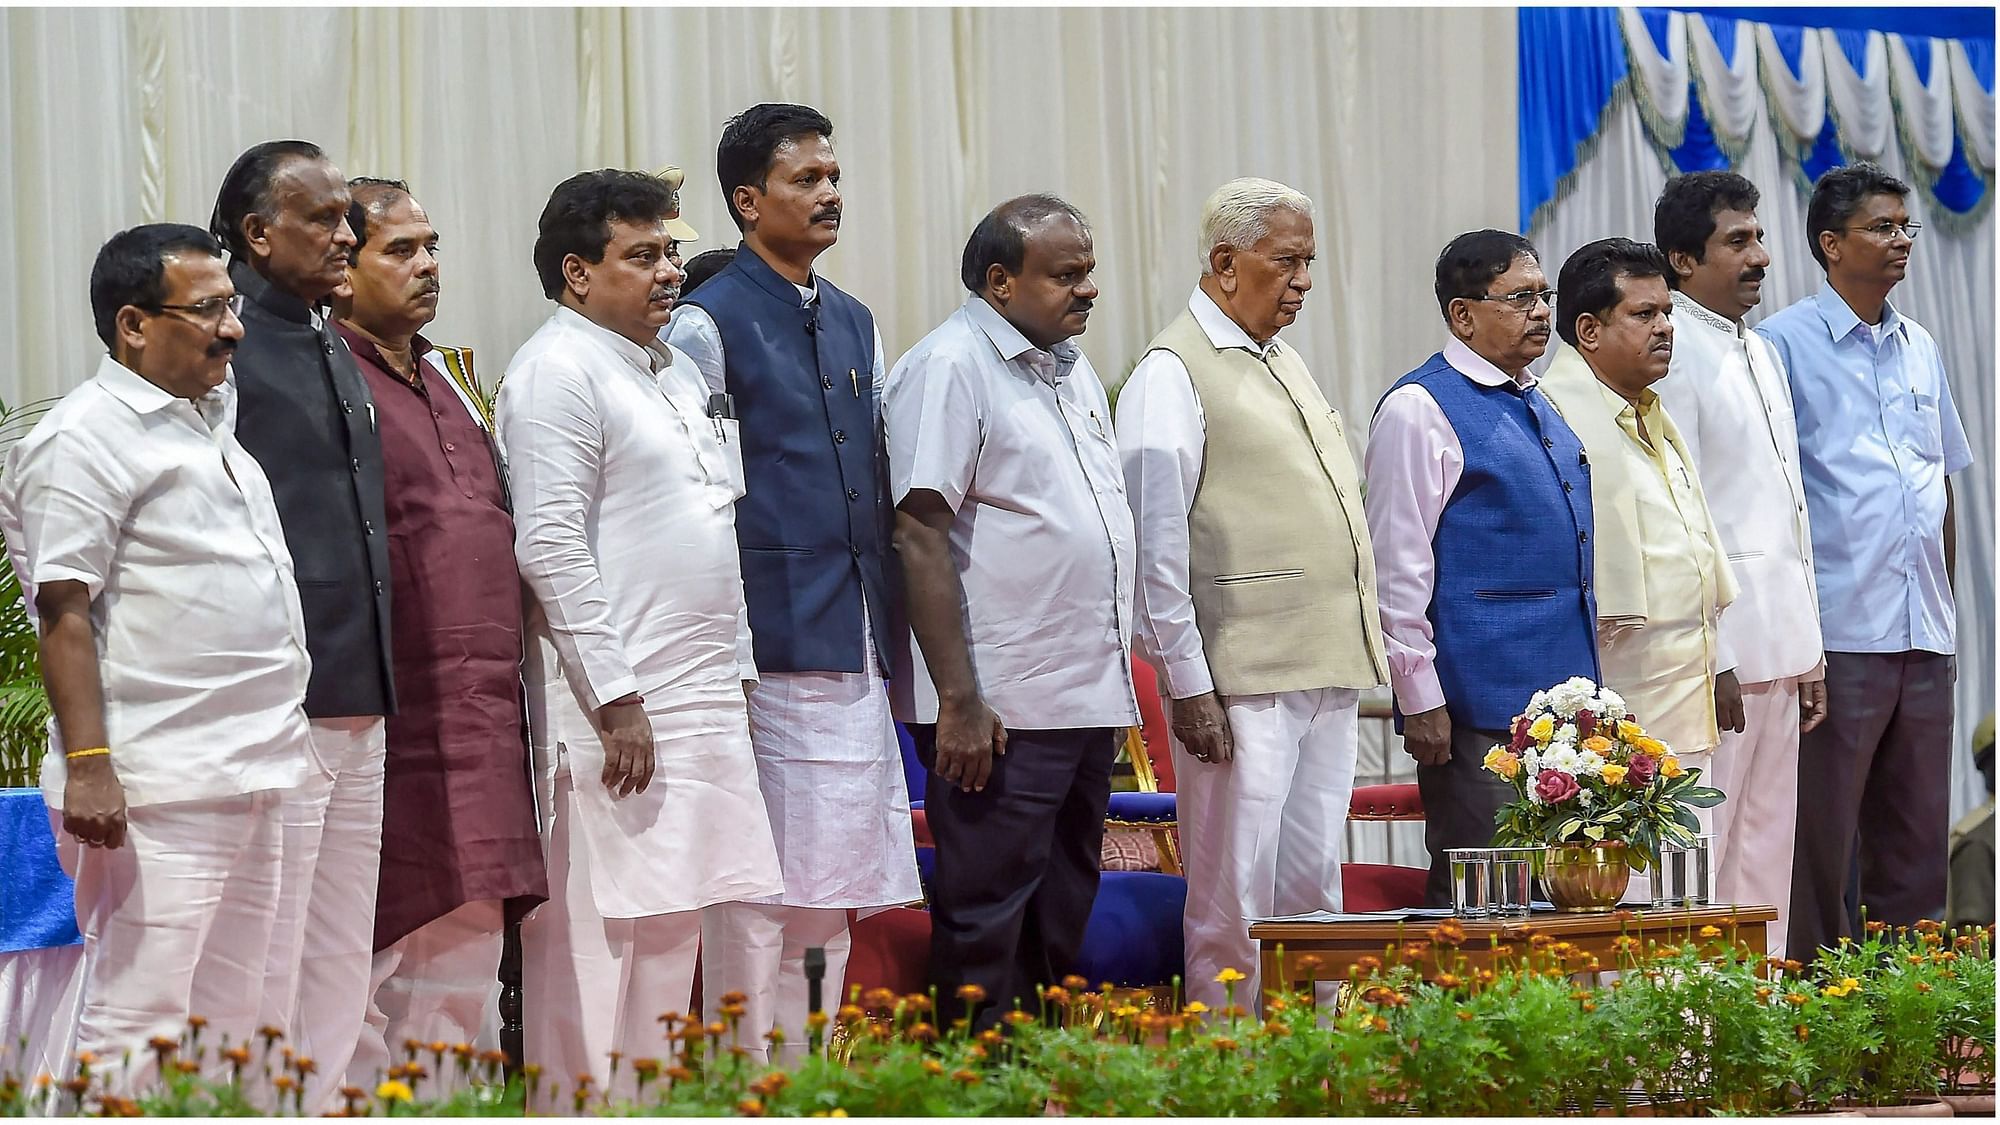 Karnataka Governor Vajubhai Vala (centre), Chief Minister HD Kumaraswamy, Deputy CM G Parameshwara with newly inducted ministers during the swearing-in ceremony for the Cabinet expansion of coalition government of Congress-JD(S), in Bengaluru, on 22 December.